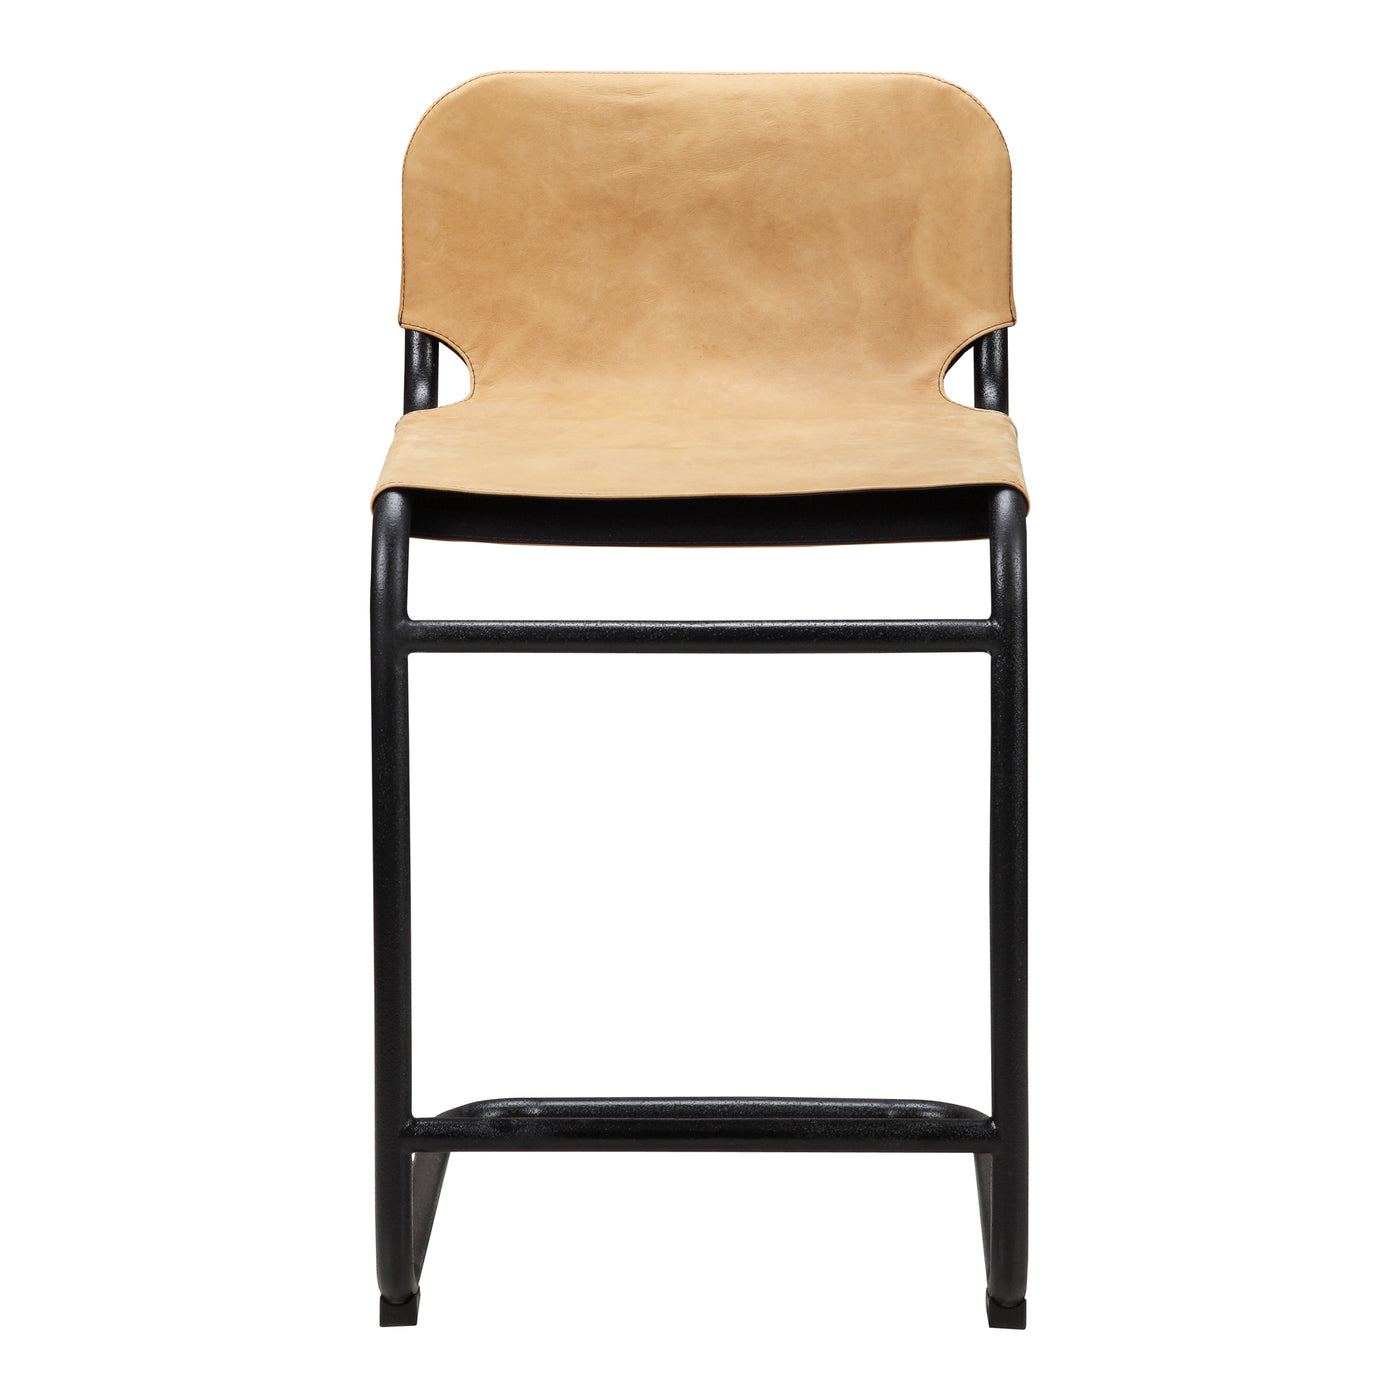 Meet your new favorite bar stool! The Baker has an ultra-supple tan leather seat, supported by a thick black iron frame. A...